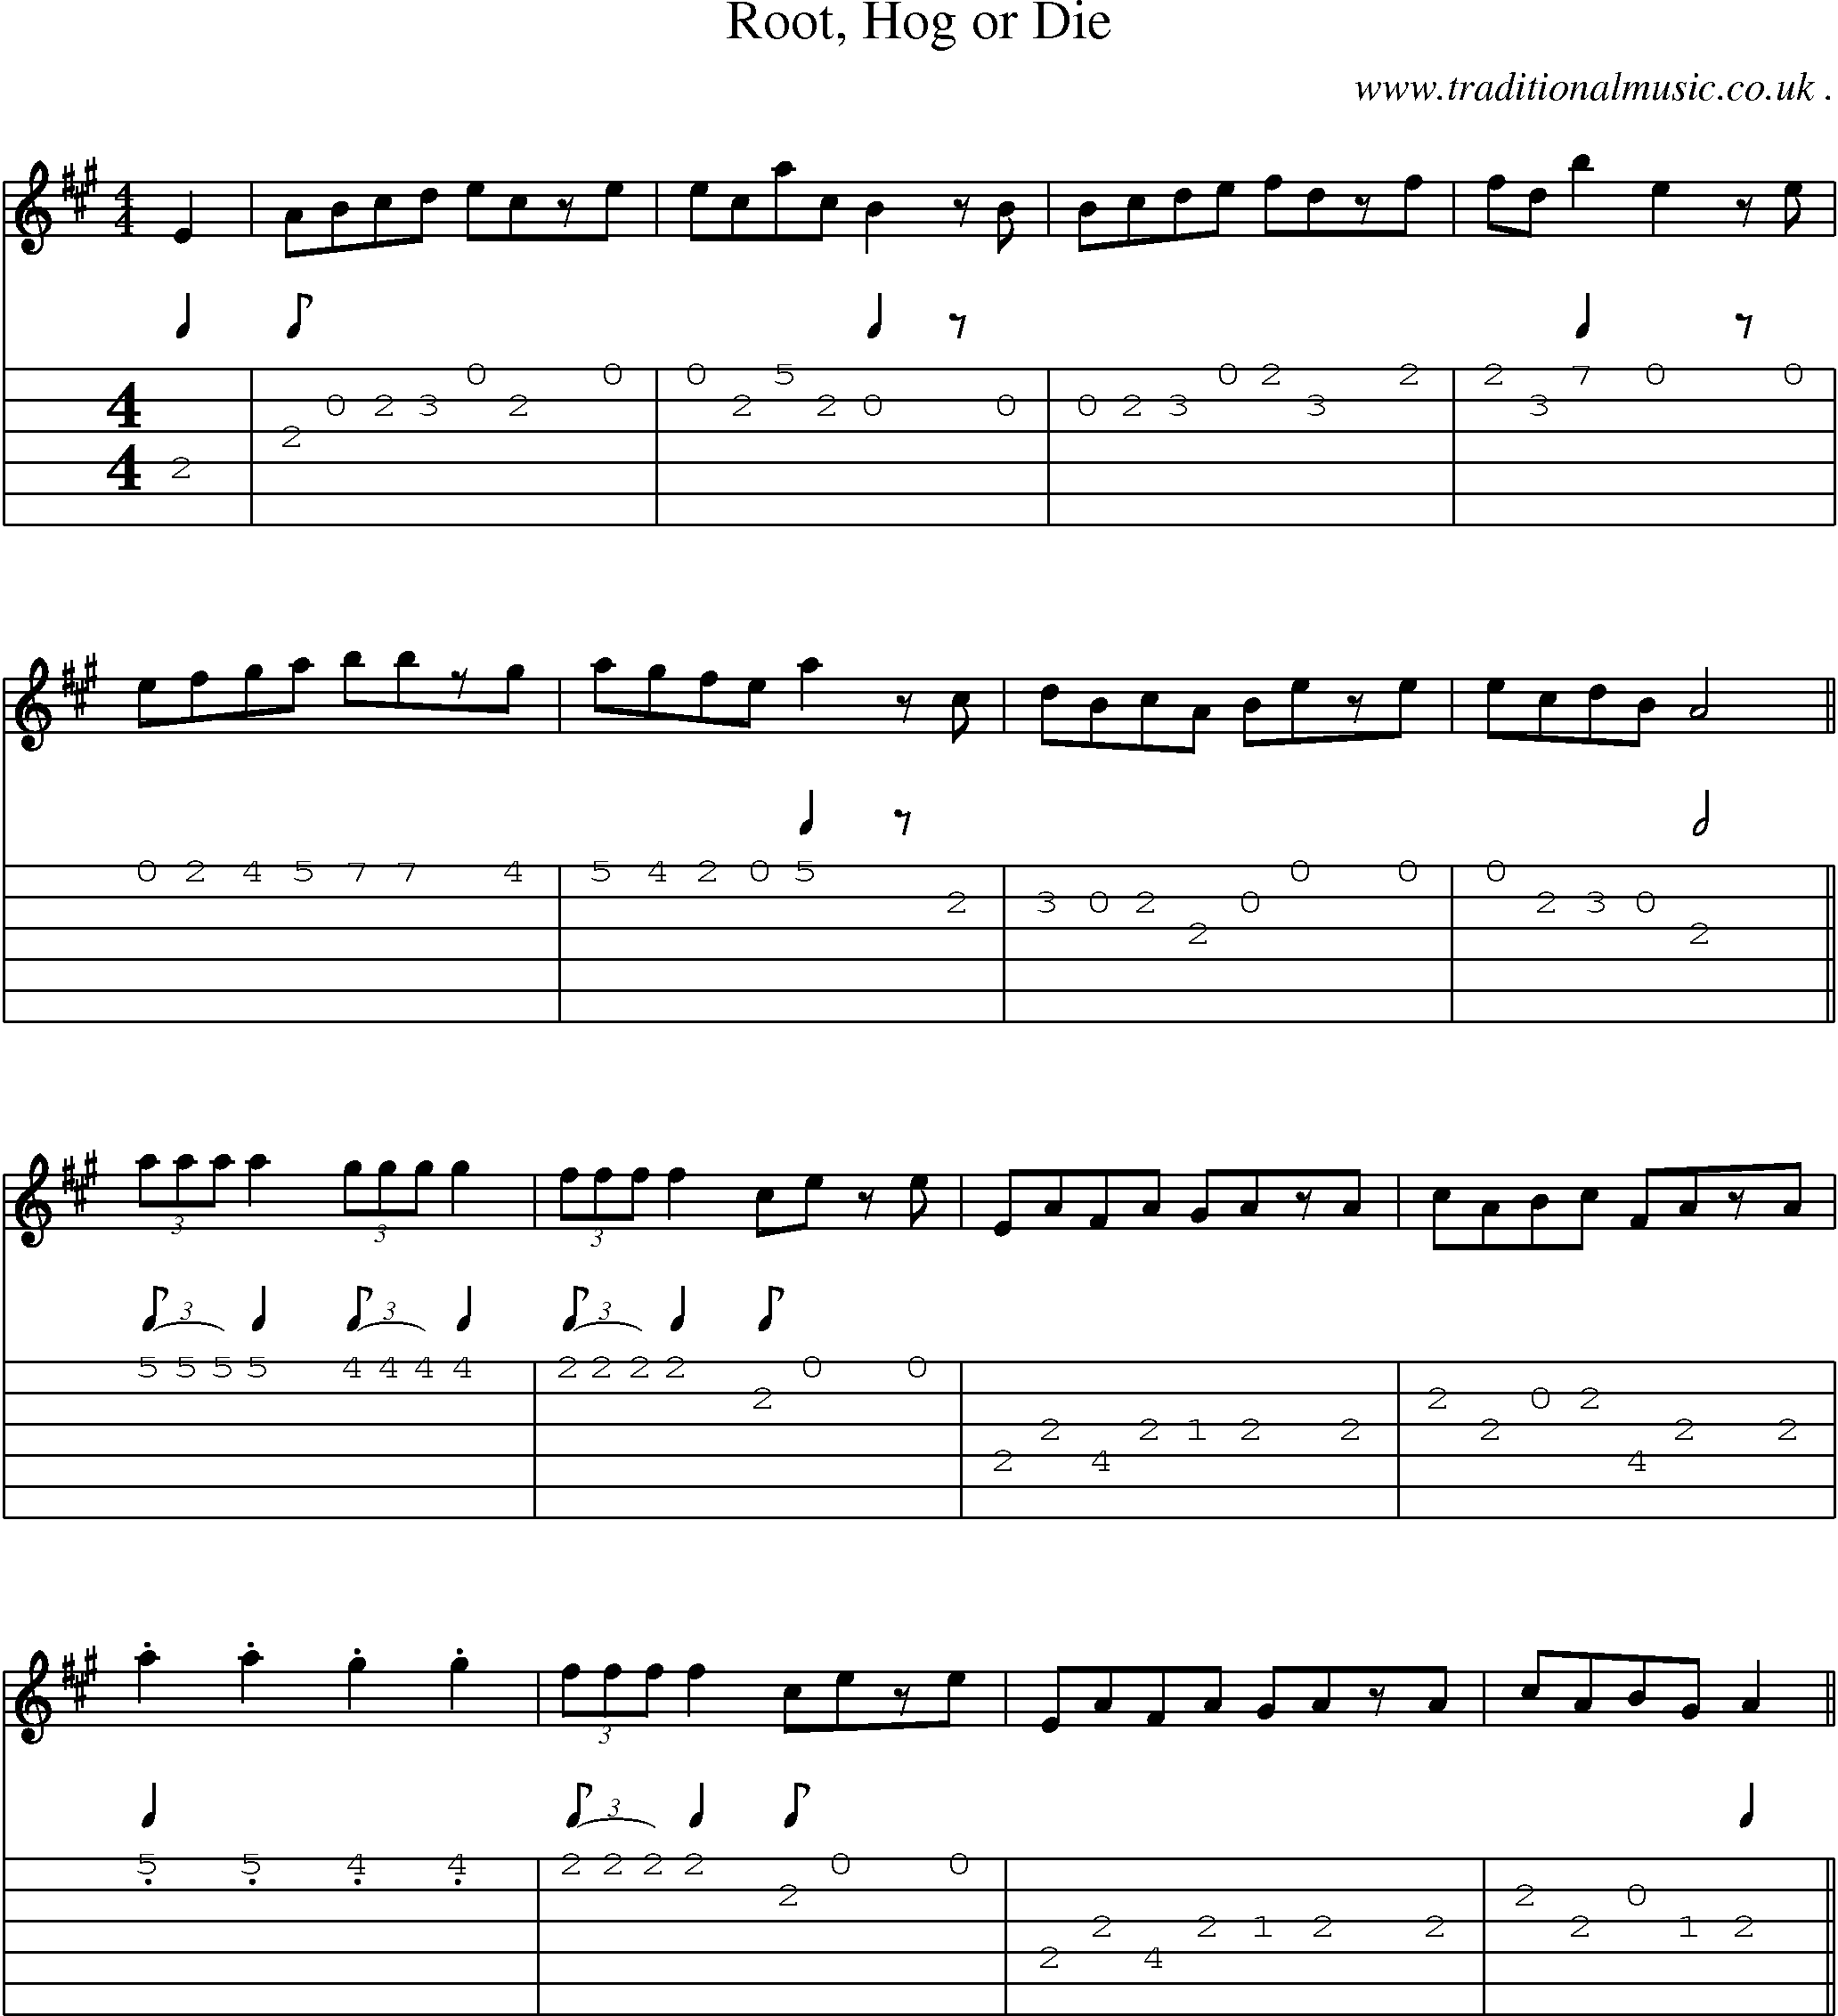 Music Score and Guitar Tabs for Root Hog Or Die